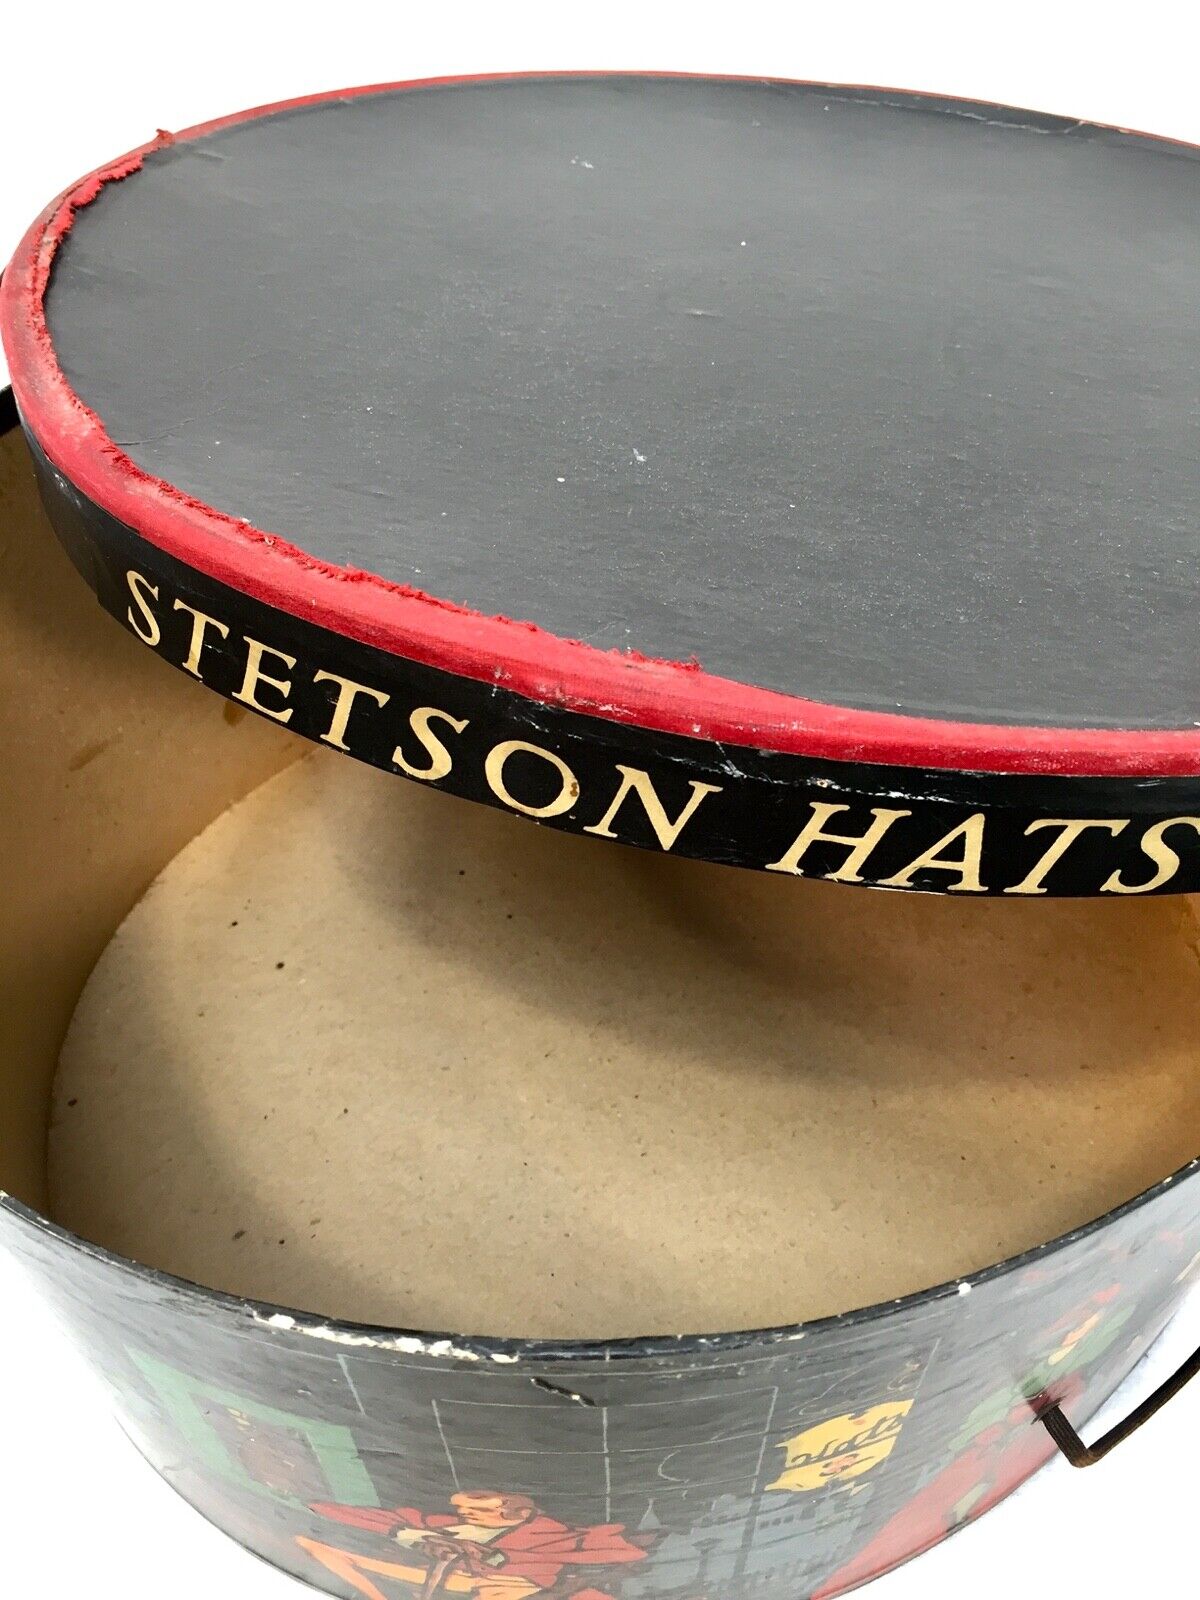 Antique Advertising - 1930s Decorated Victorian Scene Hat Box by Stetson Hats